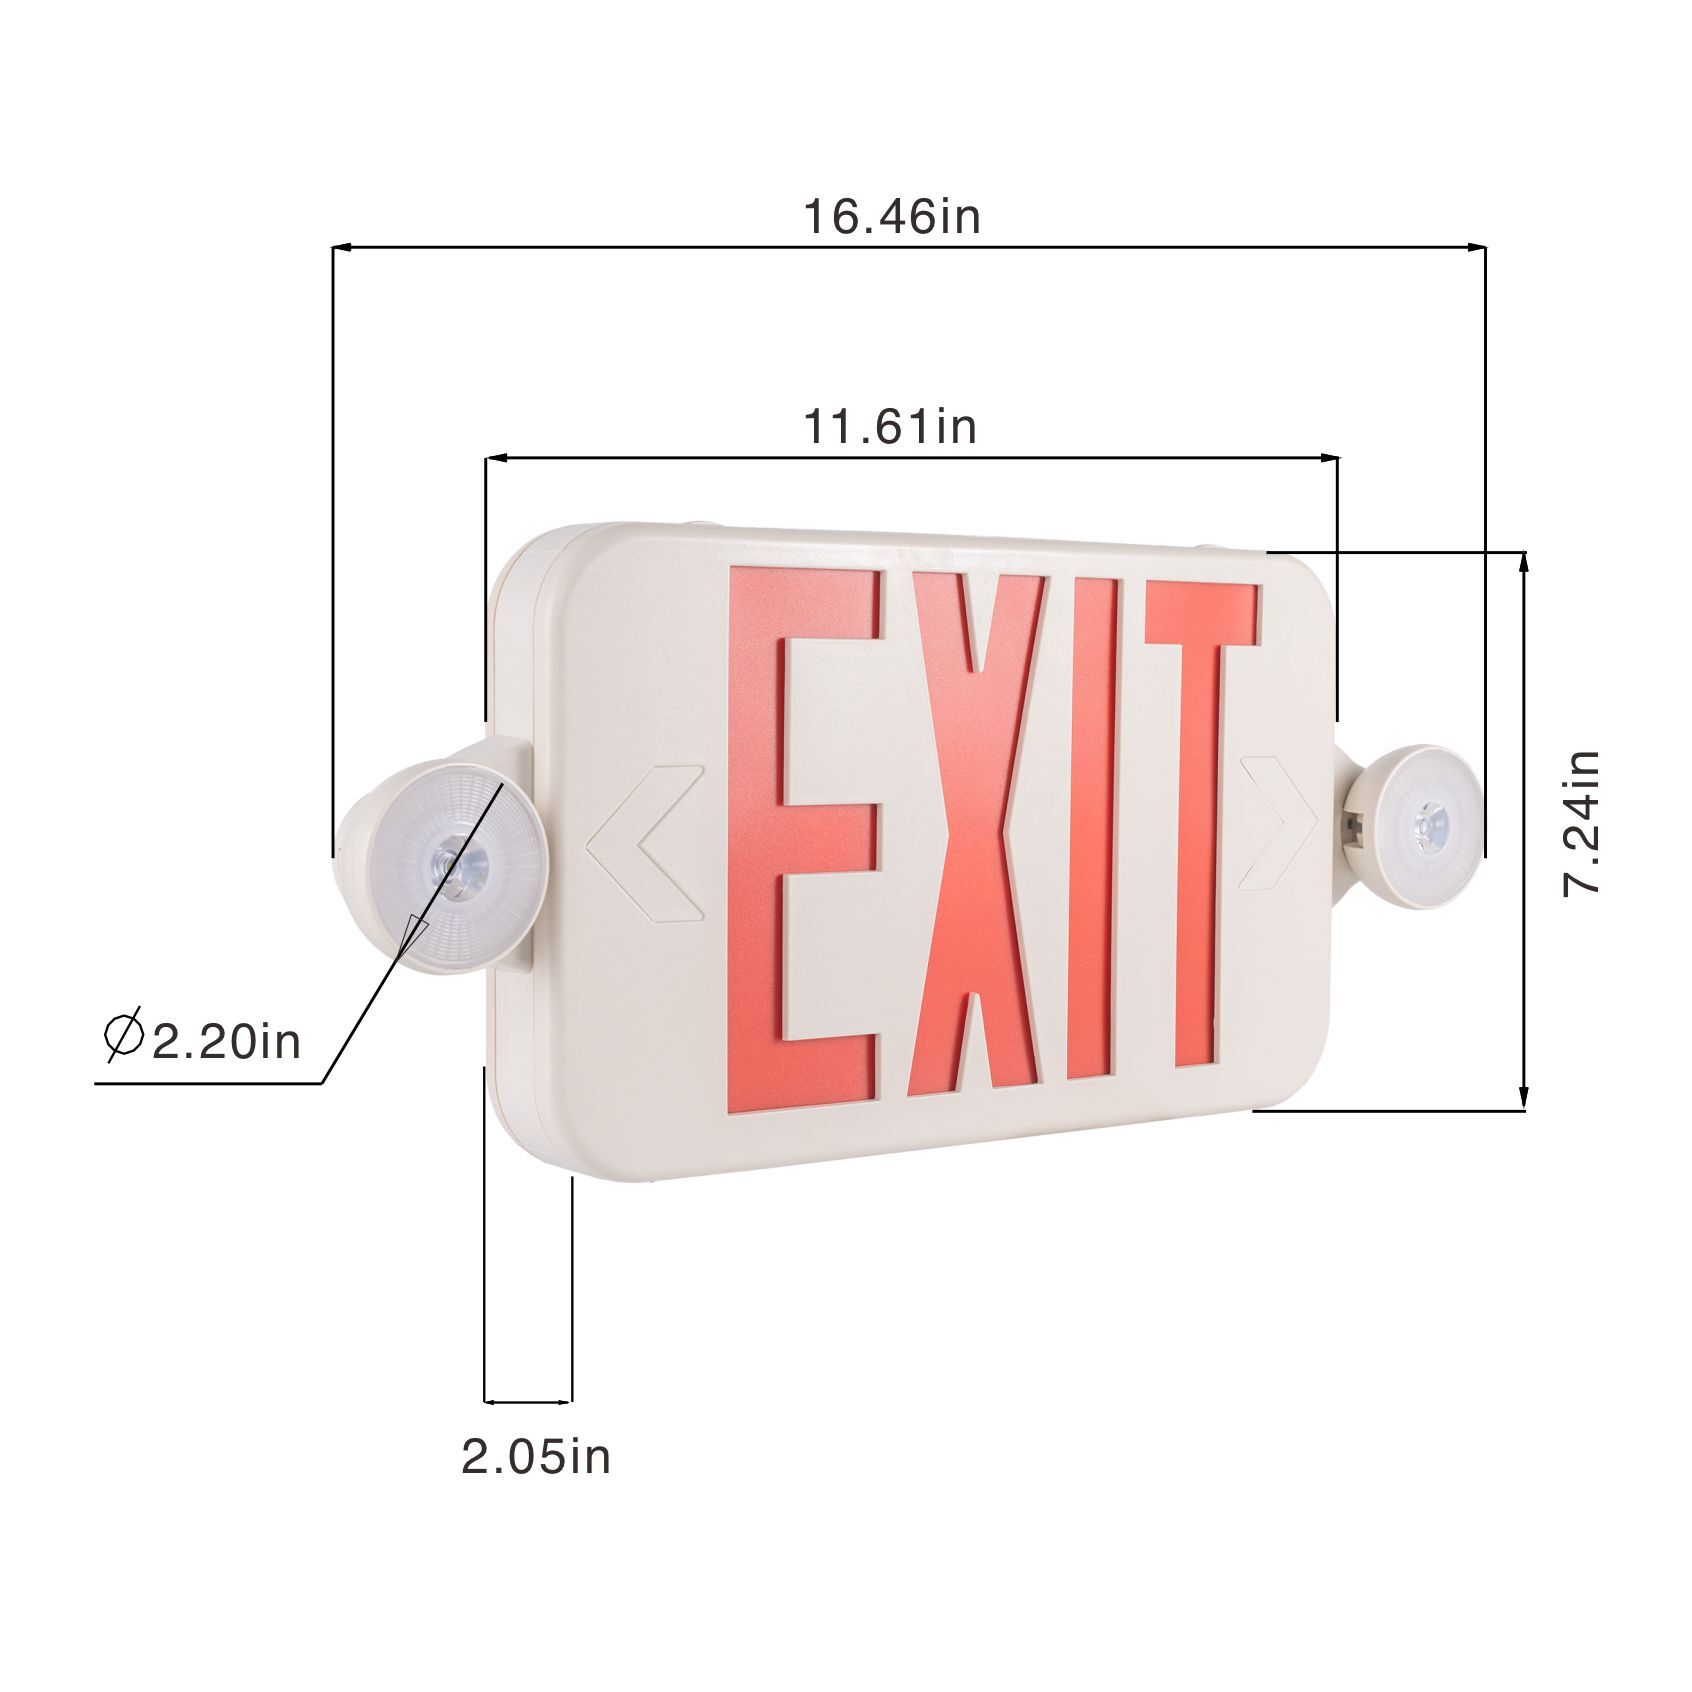 Gruenlich LED Combo Emergency EXIT Sign with 2 Adjustable Head Lights and Double Face, Back Up Batteries- US Standard Red Letter Emergency Exit Lighting, UL 924 Qualified (1-Pack)